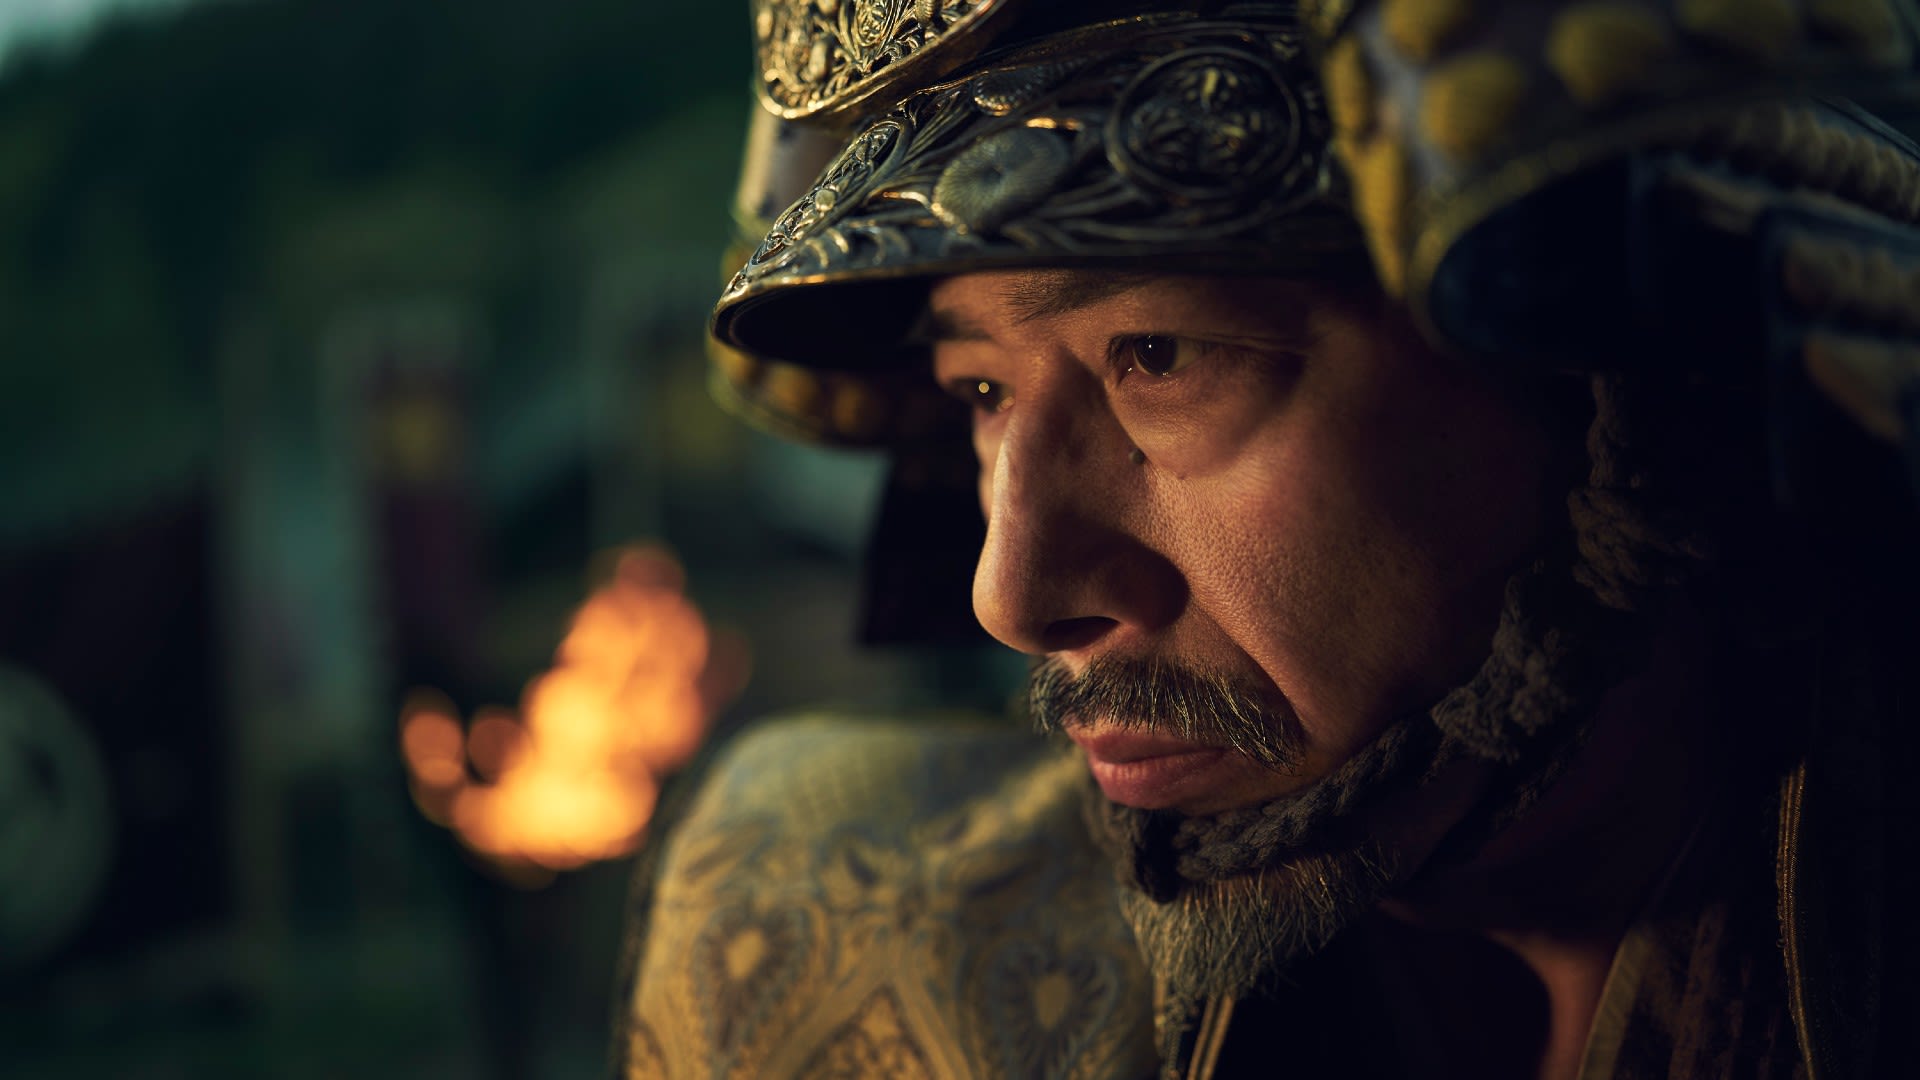 Shogun is coming back for season 2 and 3, but everyone is confused about how that will work